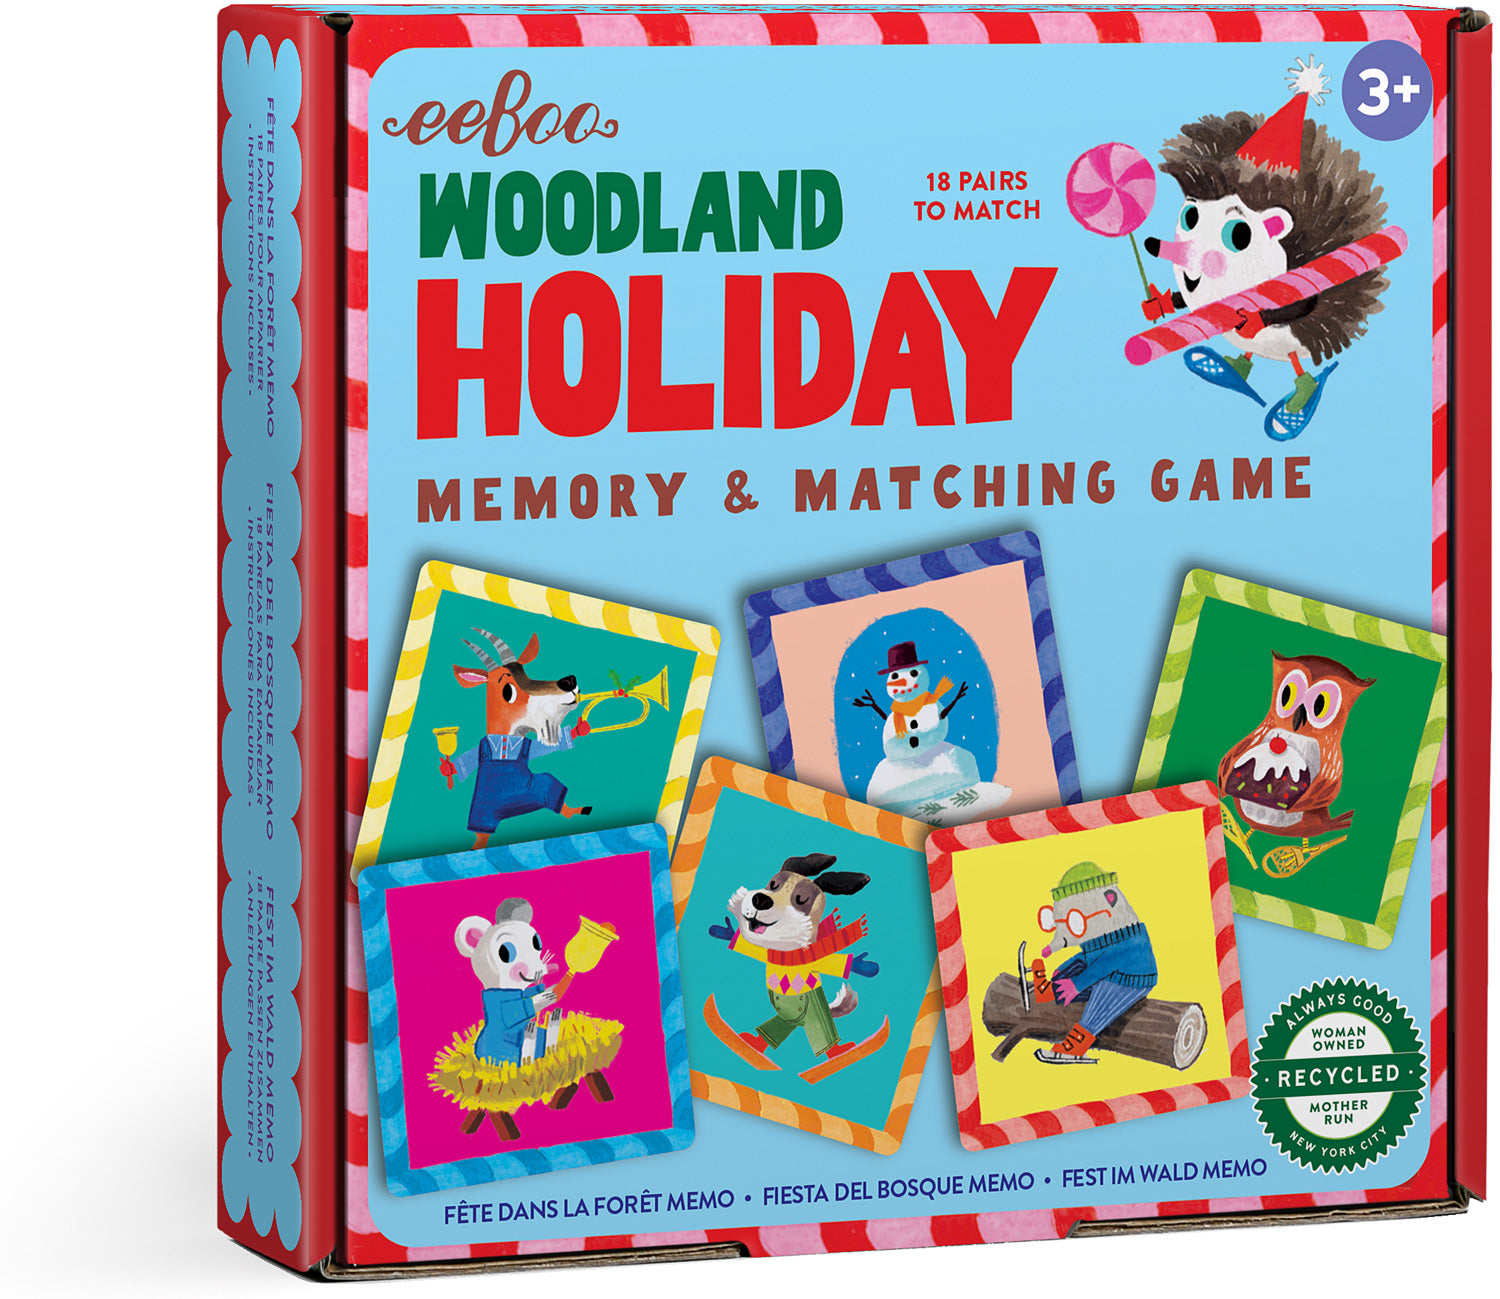 Woodland Holiday Memory & Matching Game by eeBoo # LGWDH